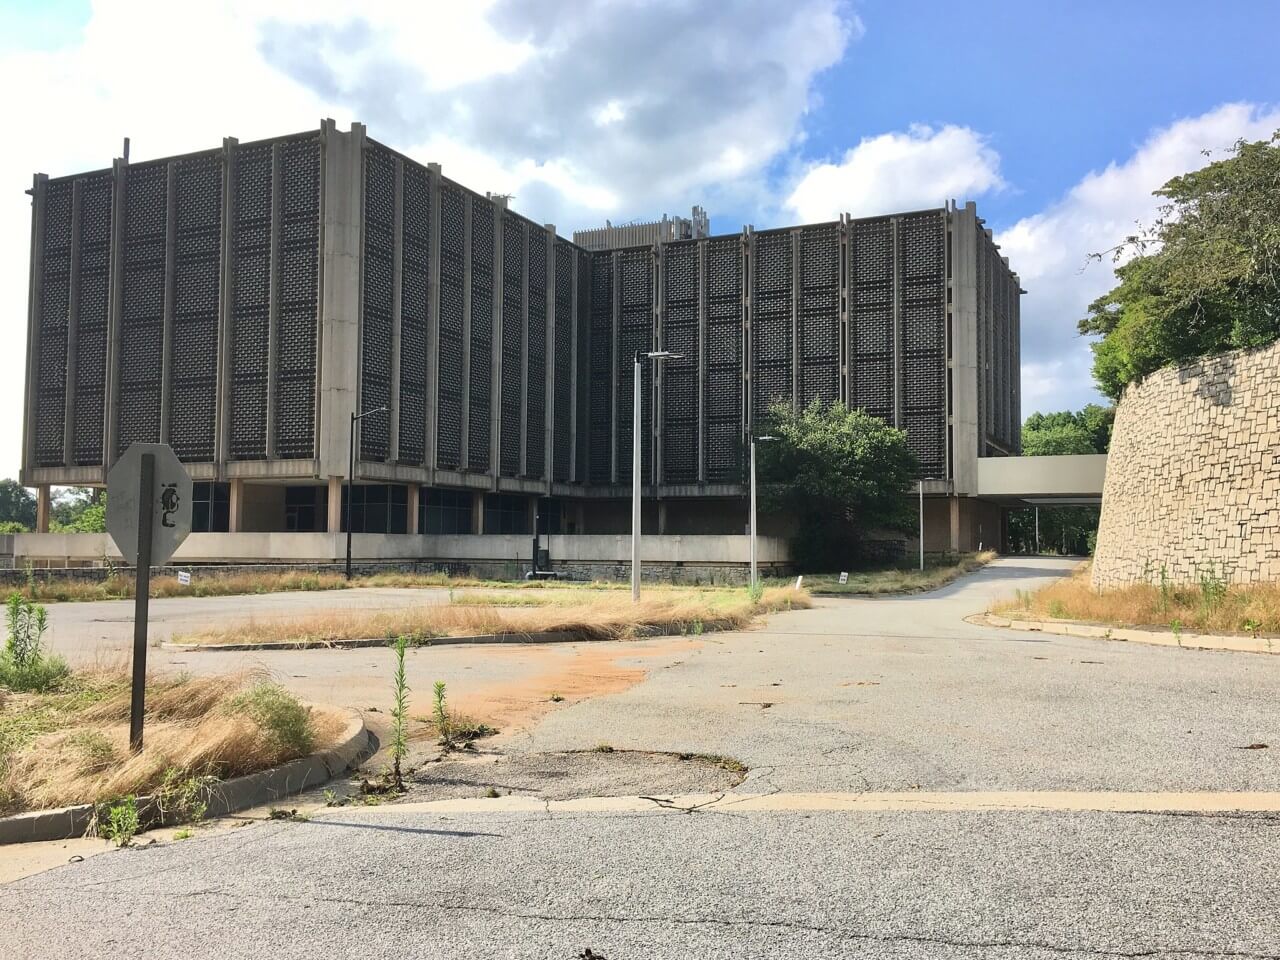 Hawkins National Laboratory” from Stranger Things set to be demolished